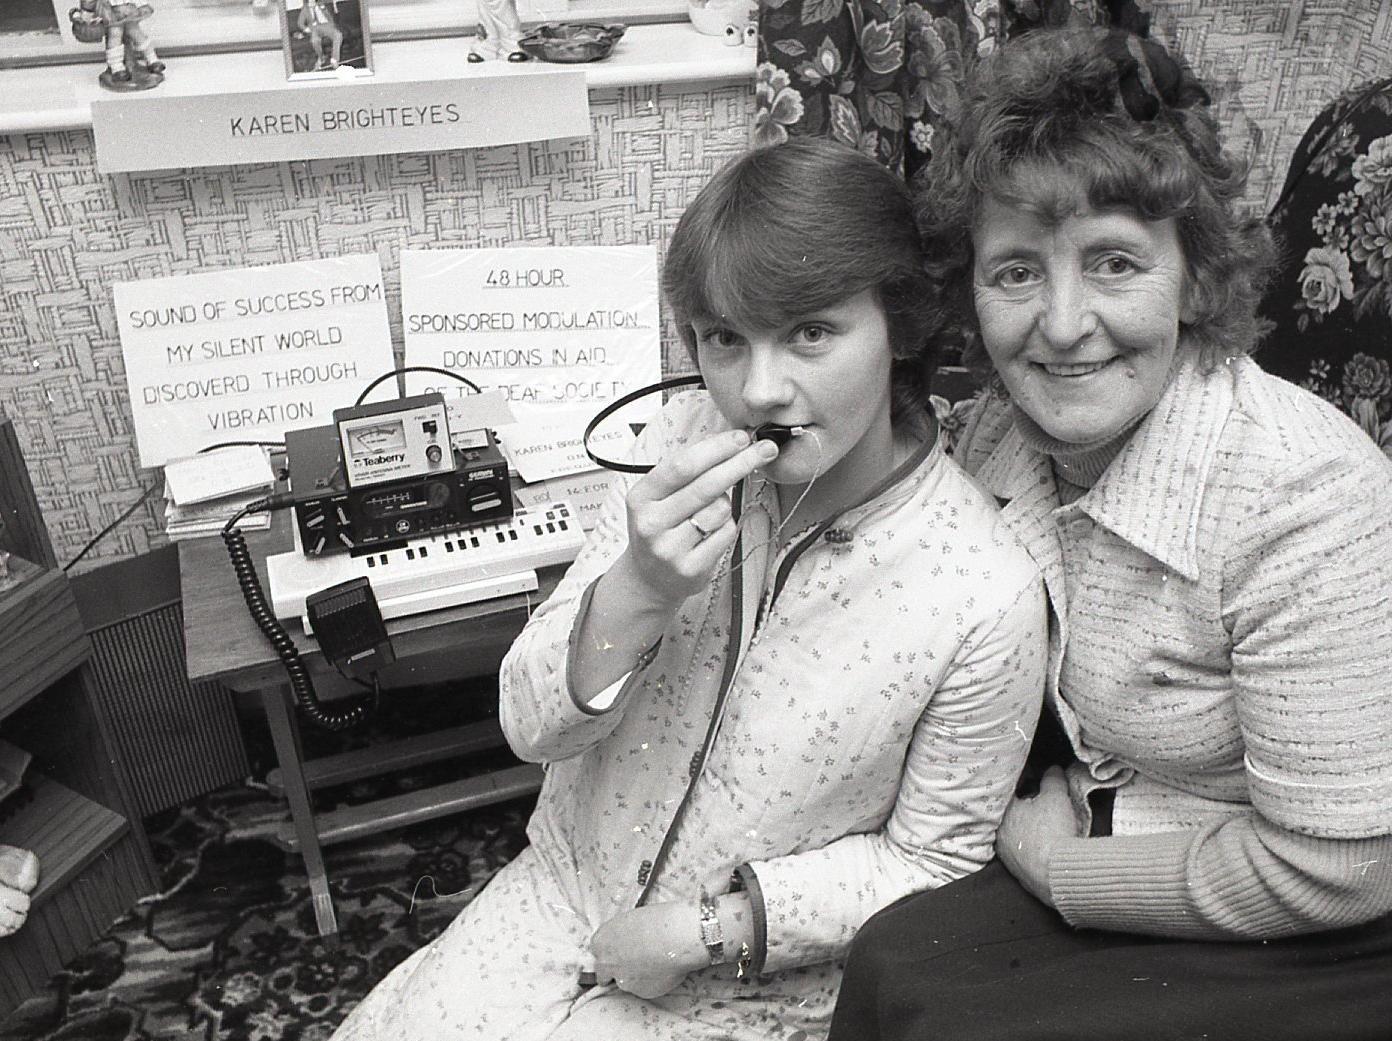 CB radio has pierced the silent world of deaf girl Karen Gardener. The 21-year-old has found a way of hearing broadcasts... with her teeth. Now she is the star "breaker" on the airwaves of seaside town Fleetwood. She is pictured above with close friend Mrs Ann Davies